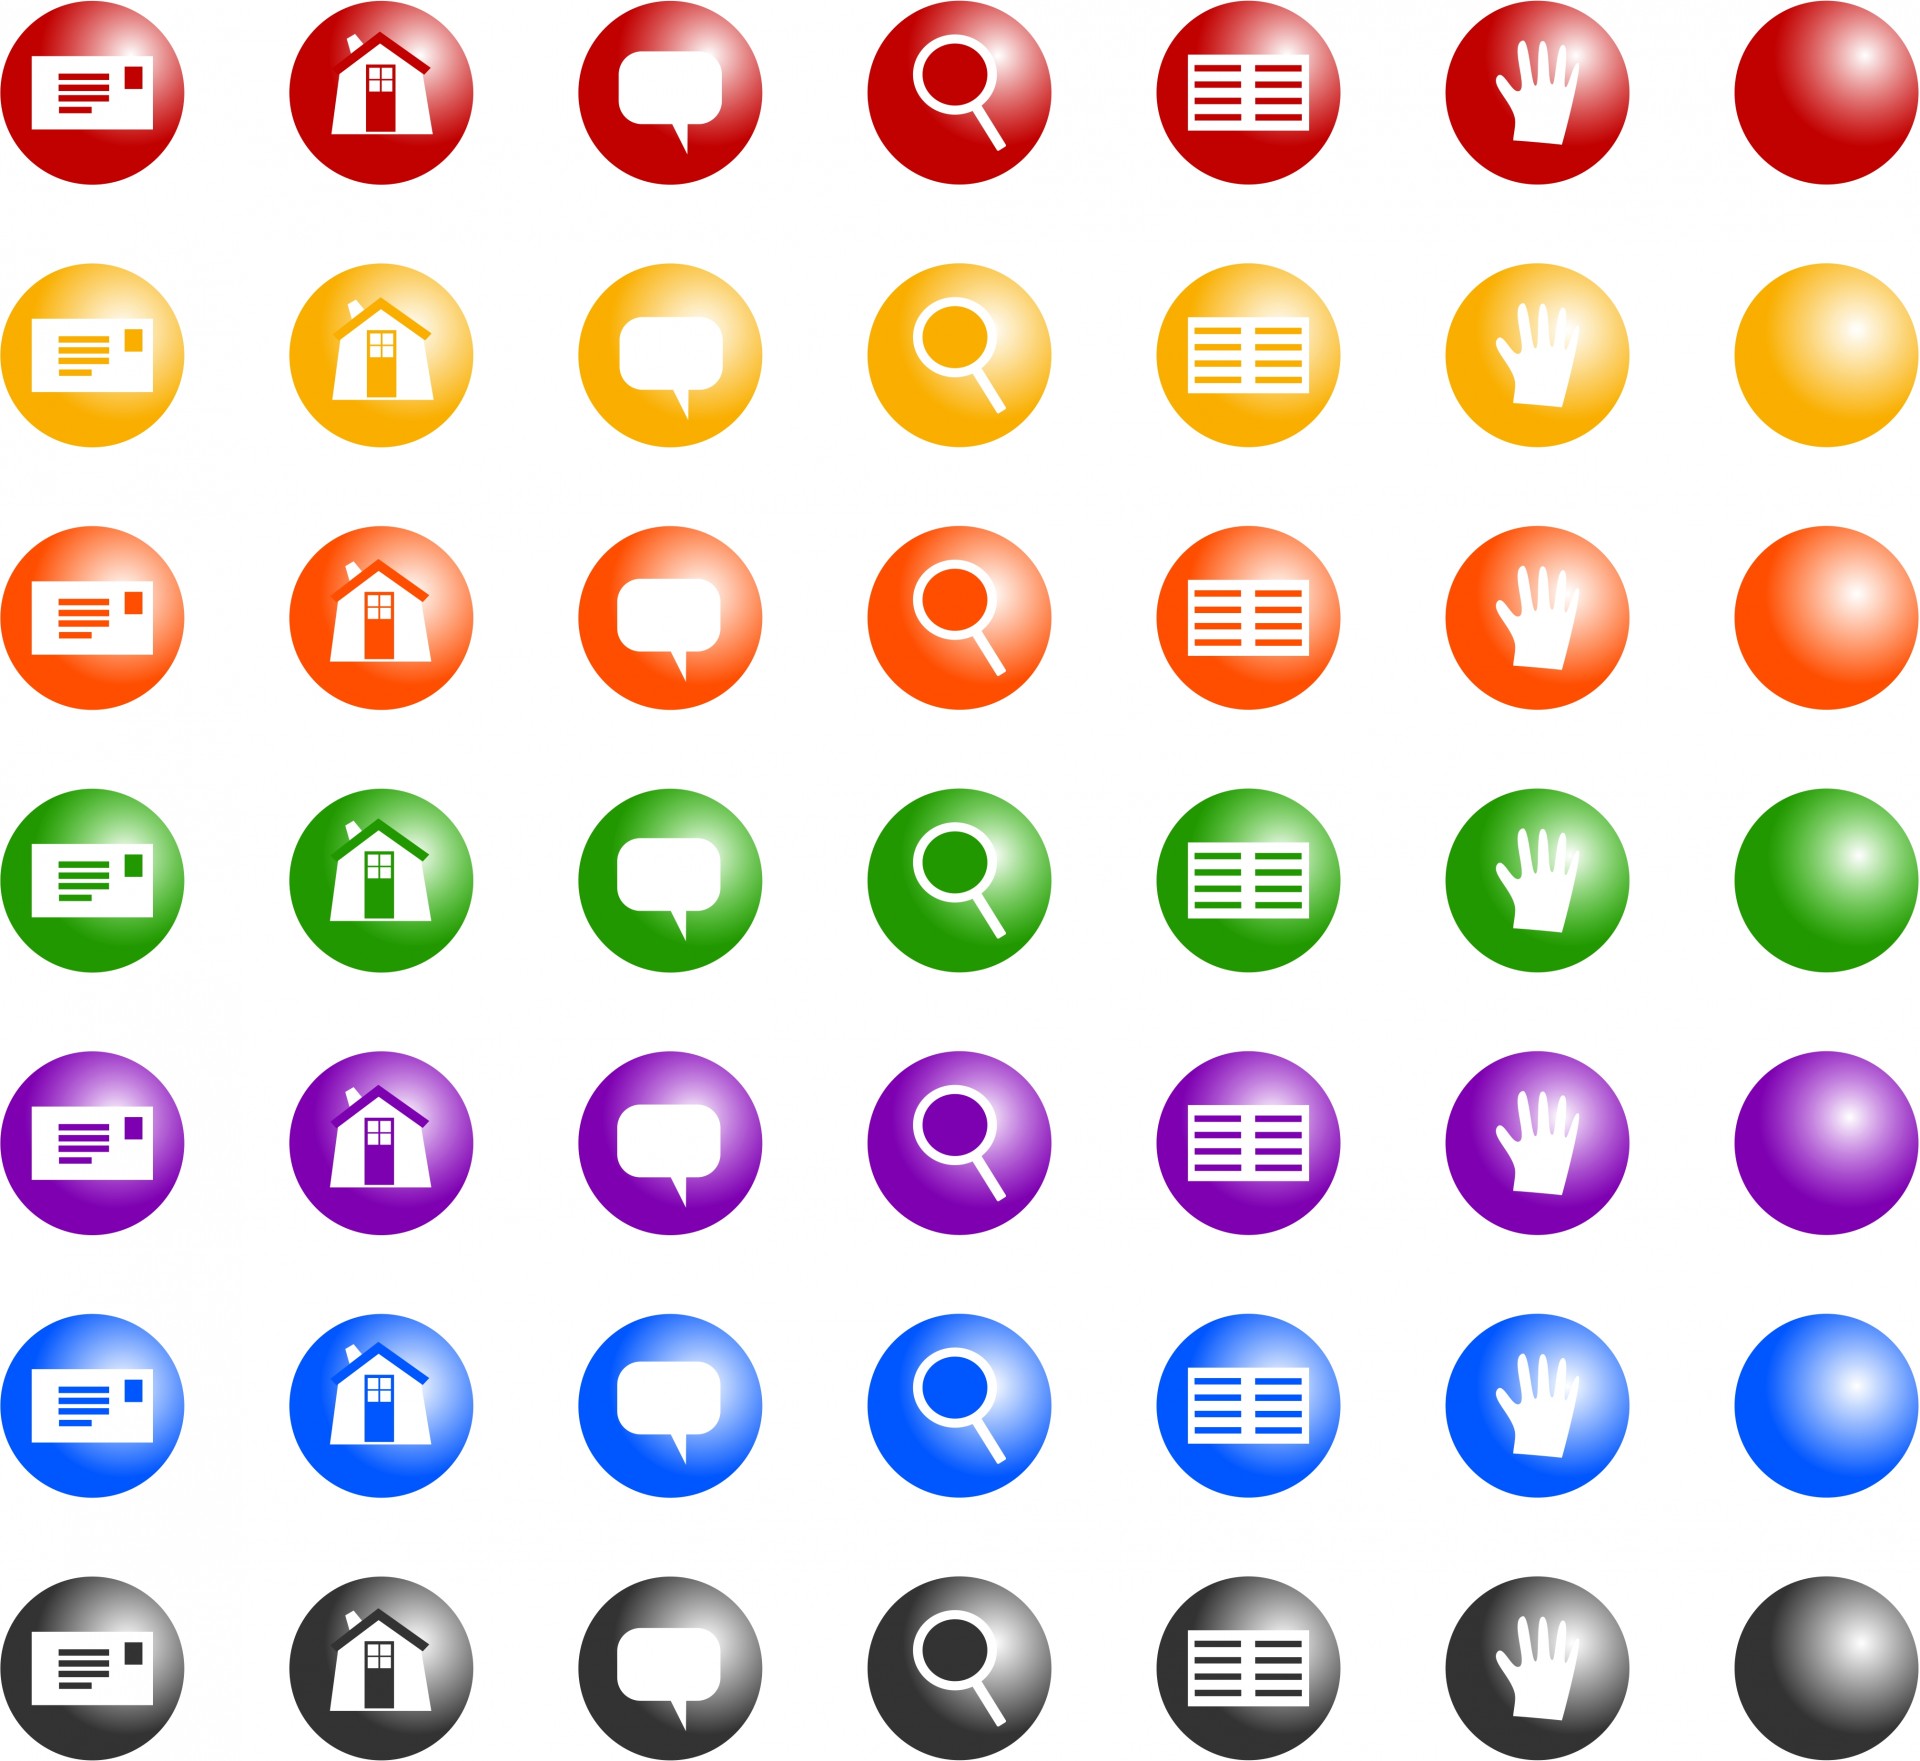 free clipart icons download - photo #13